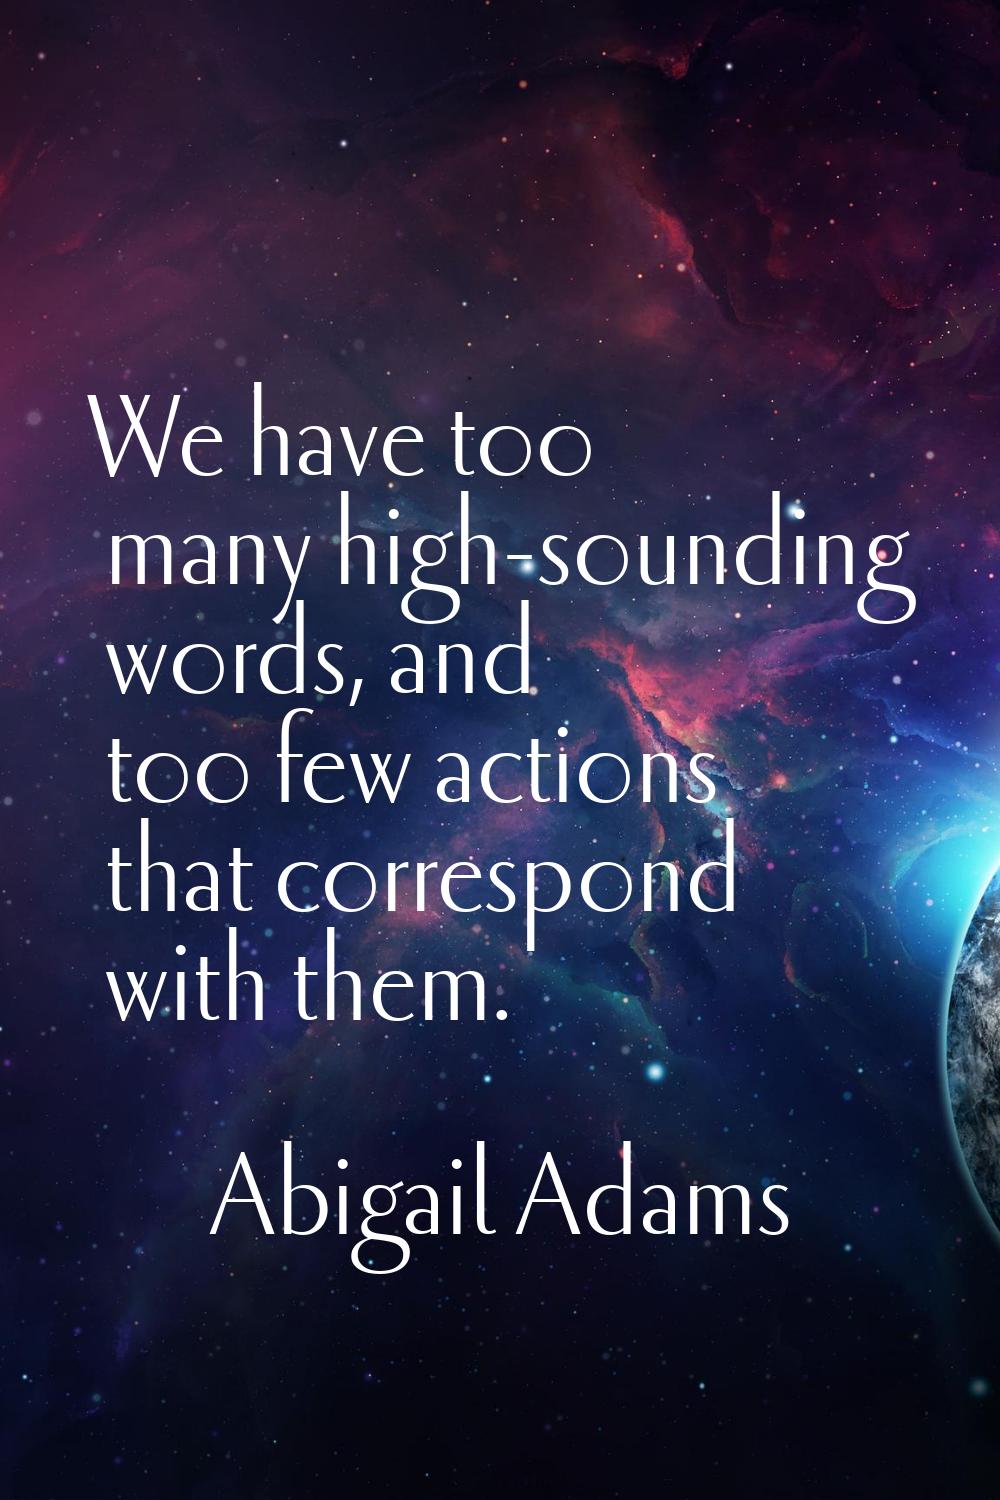 We have too many high-sounding words, and too few actions that correspond with them.